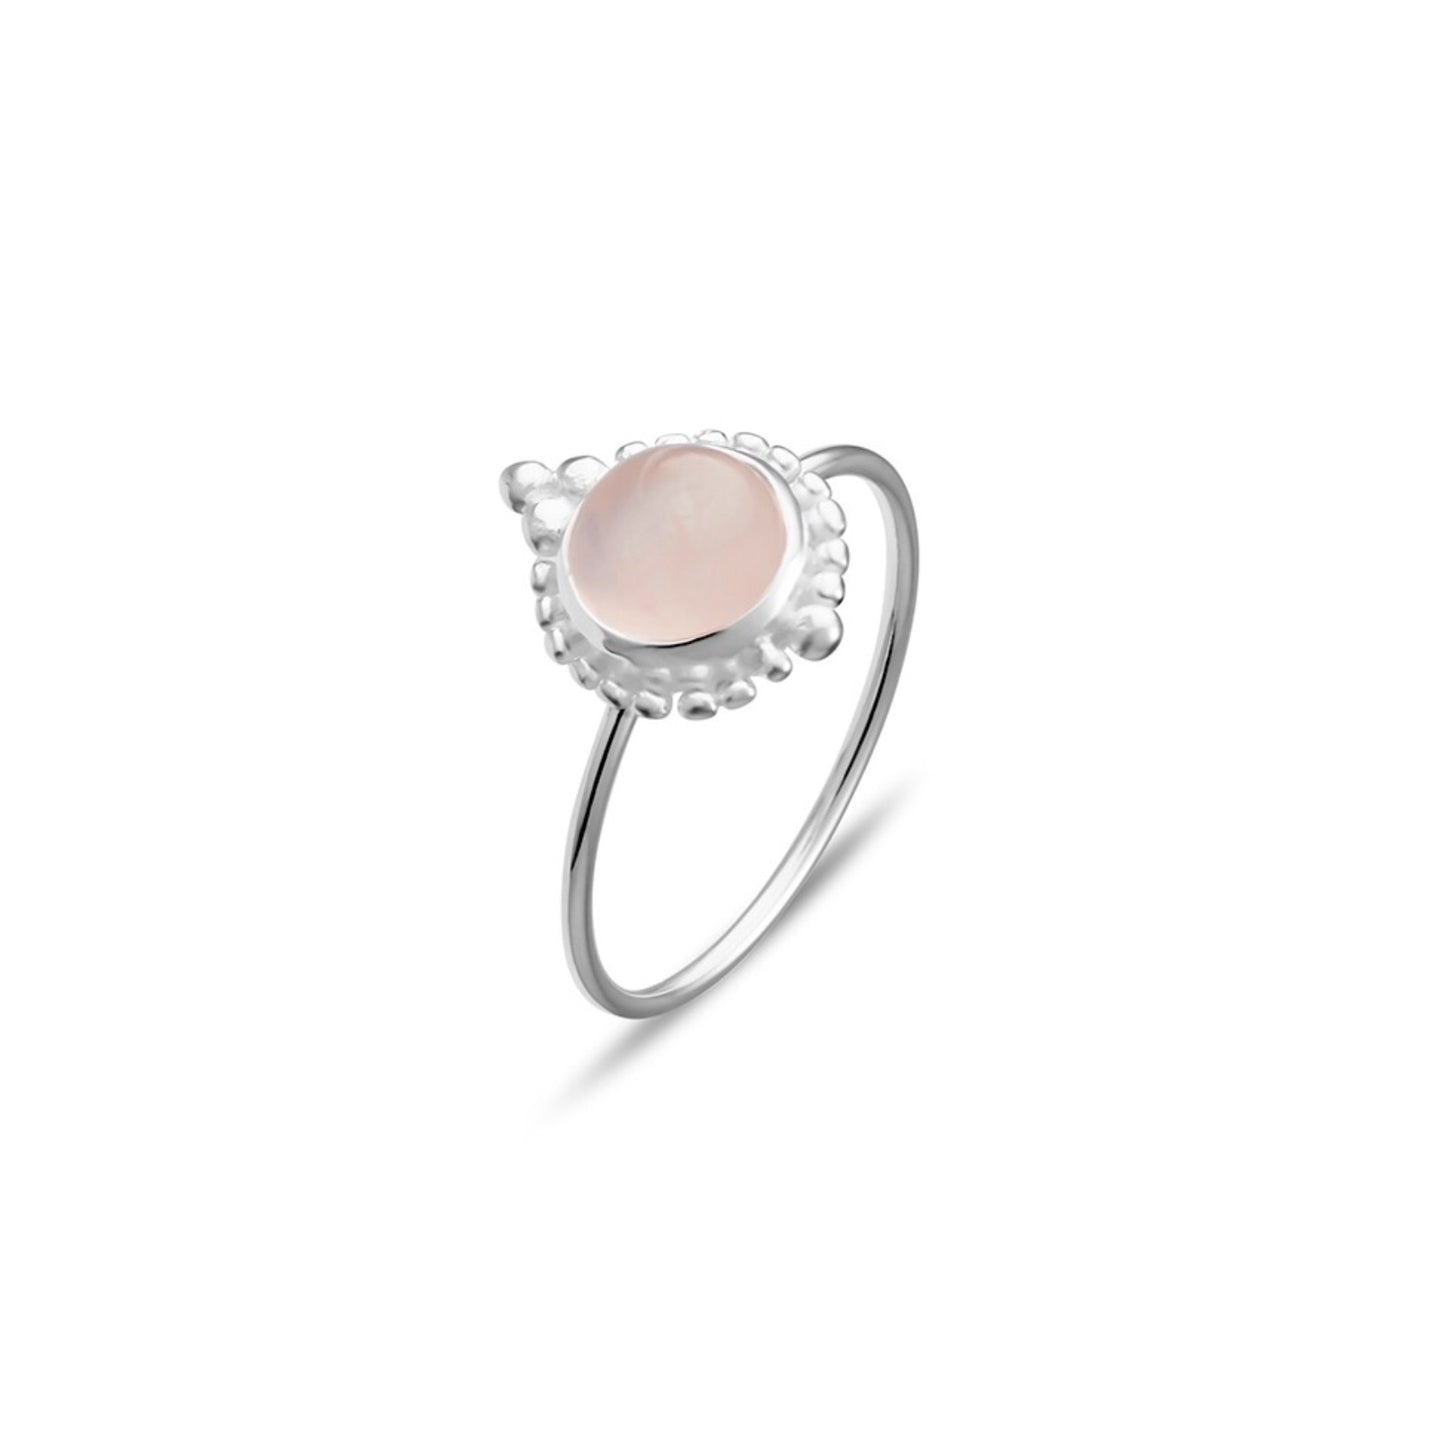 STERLING SILVER RING WITH ROSE QUARTZ STONE